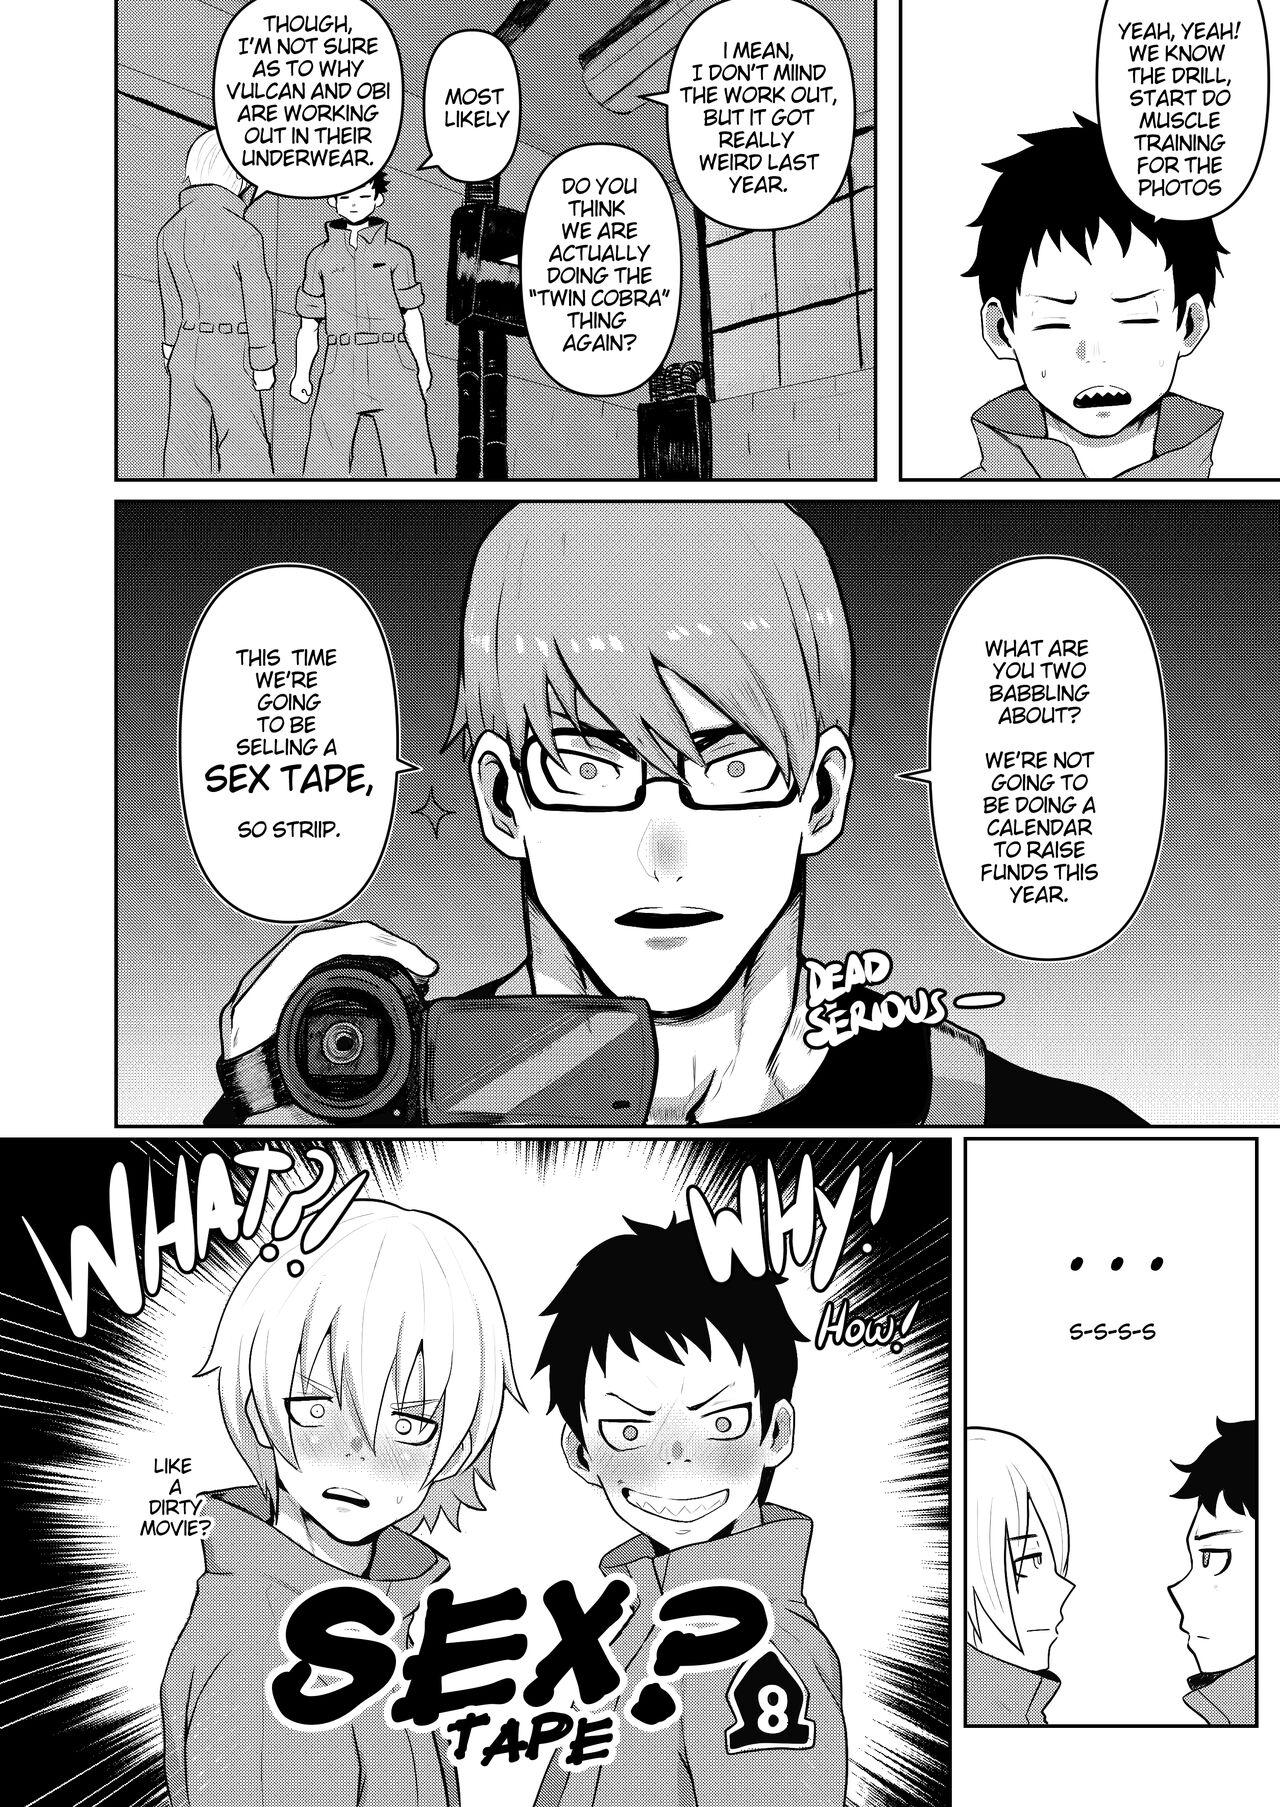 Livecams S3X FORCE - Enen no shouboutai | fire force Red - Page 5